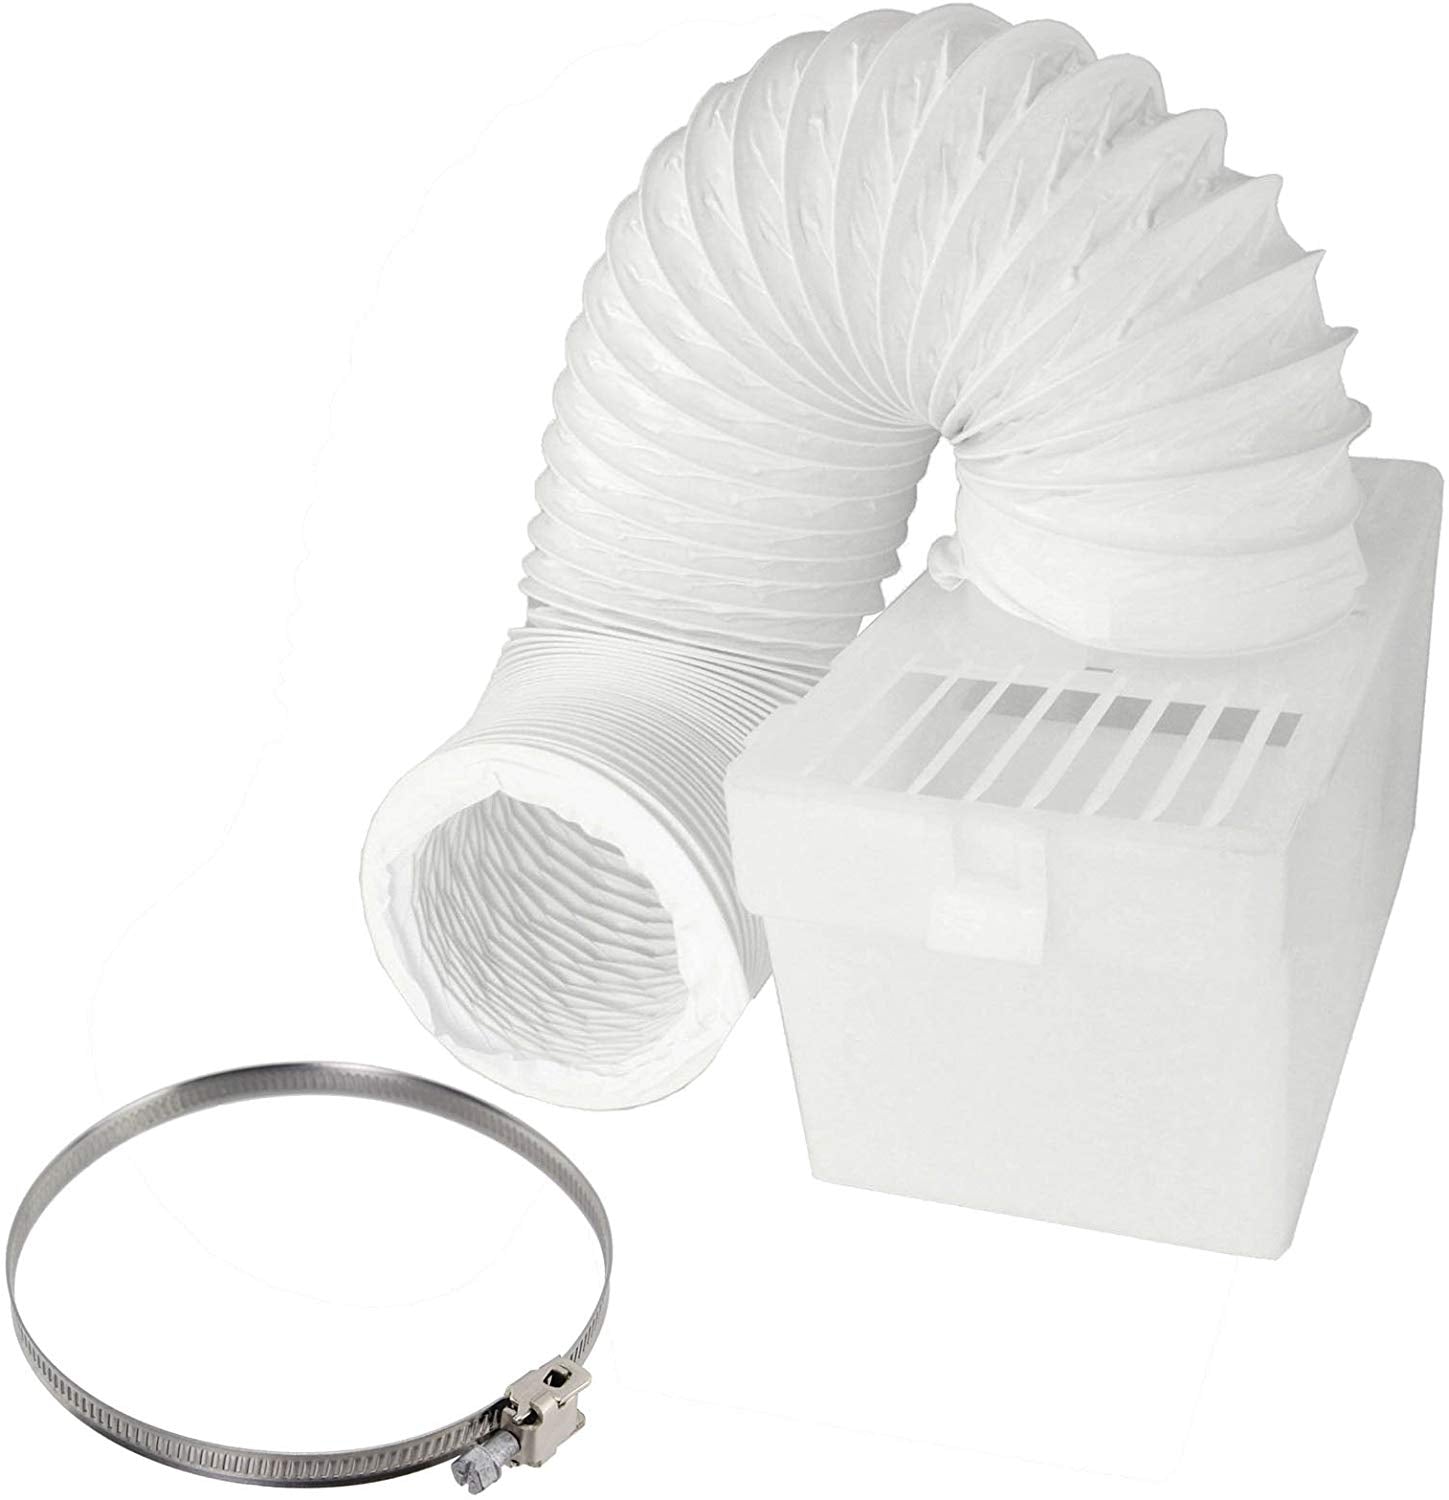 Condenser Vent Box & Hose Kit With Screw Clip for Servis Vented Tumble Dryer (4" / 100mm Diameter)